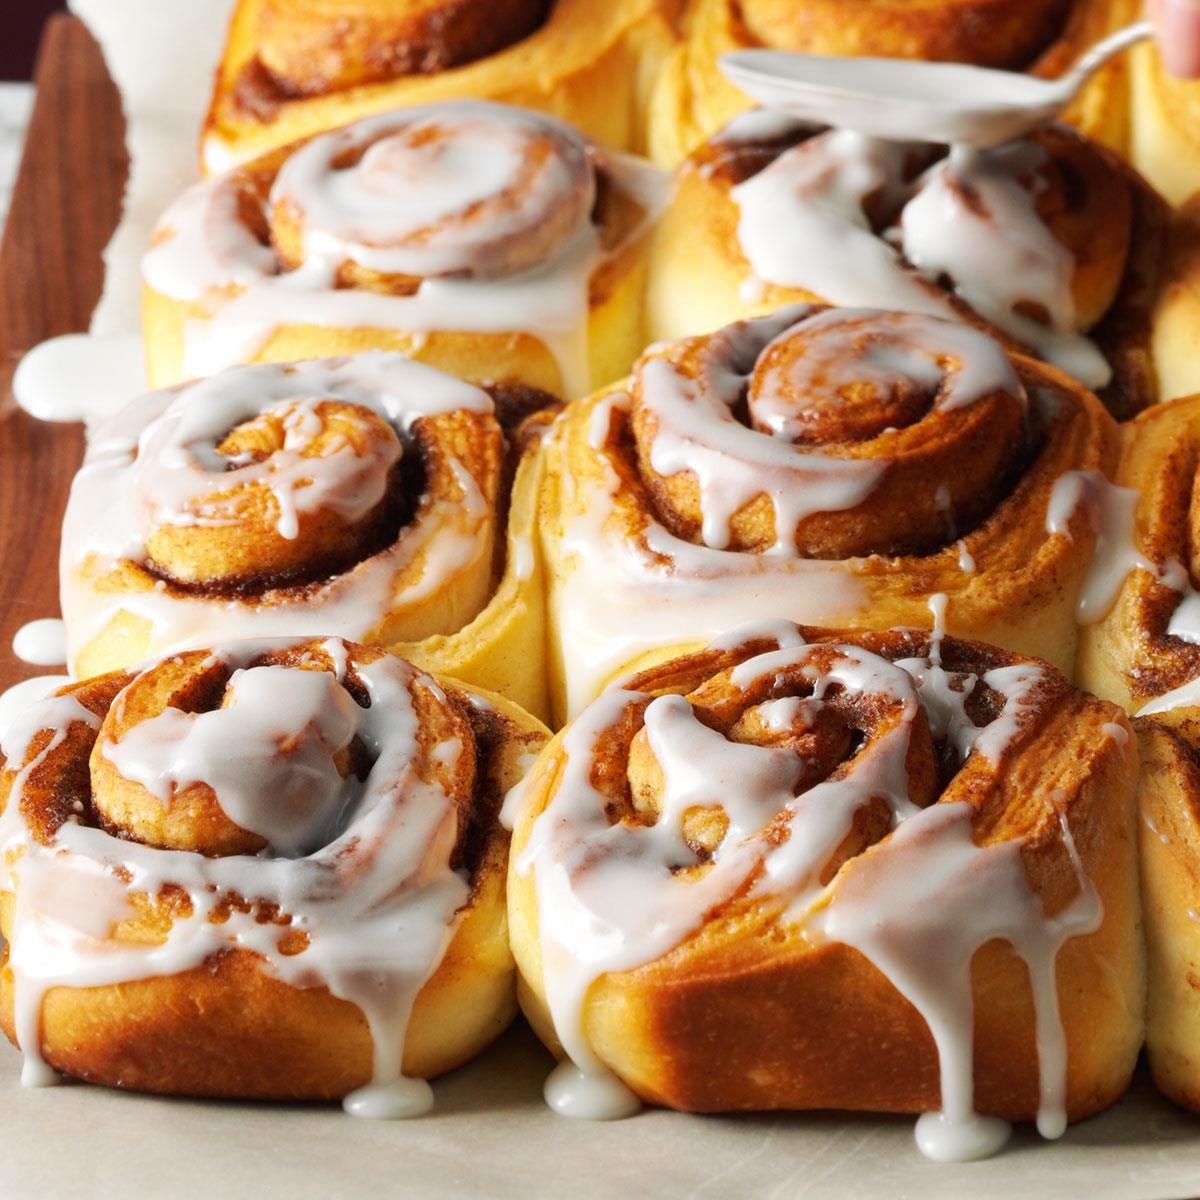 Inspired by: Cinnabon’s Classic Roll